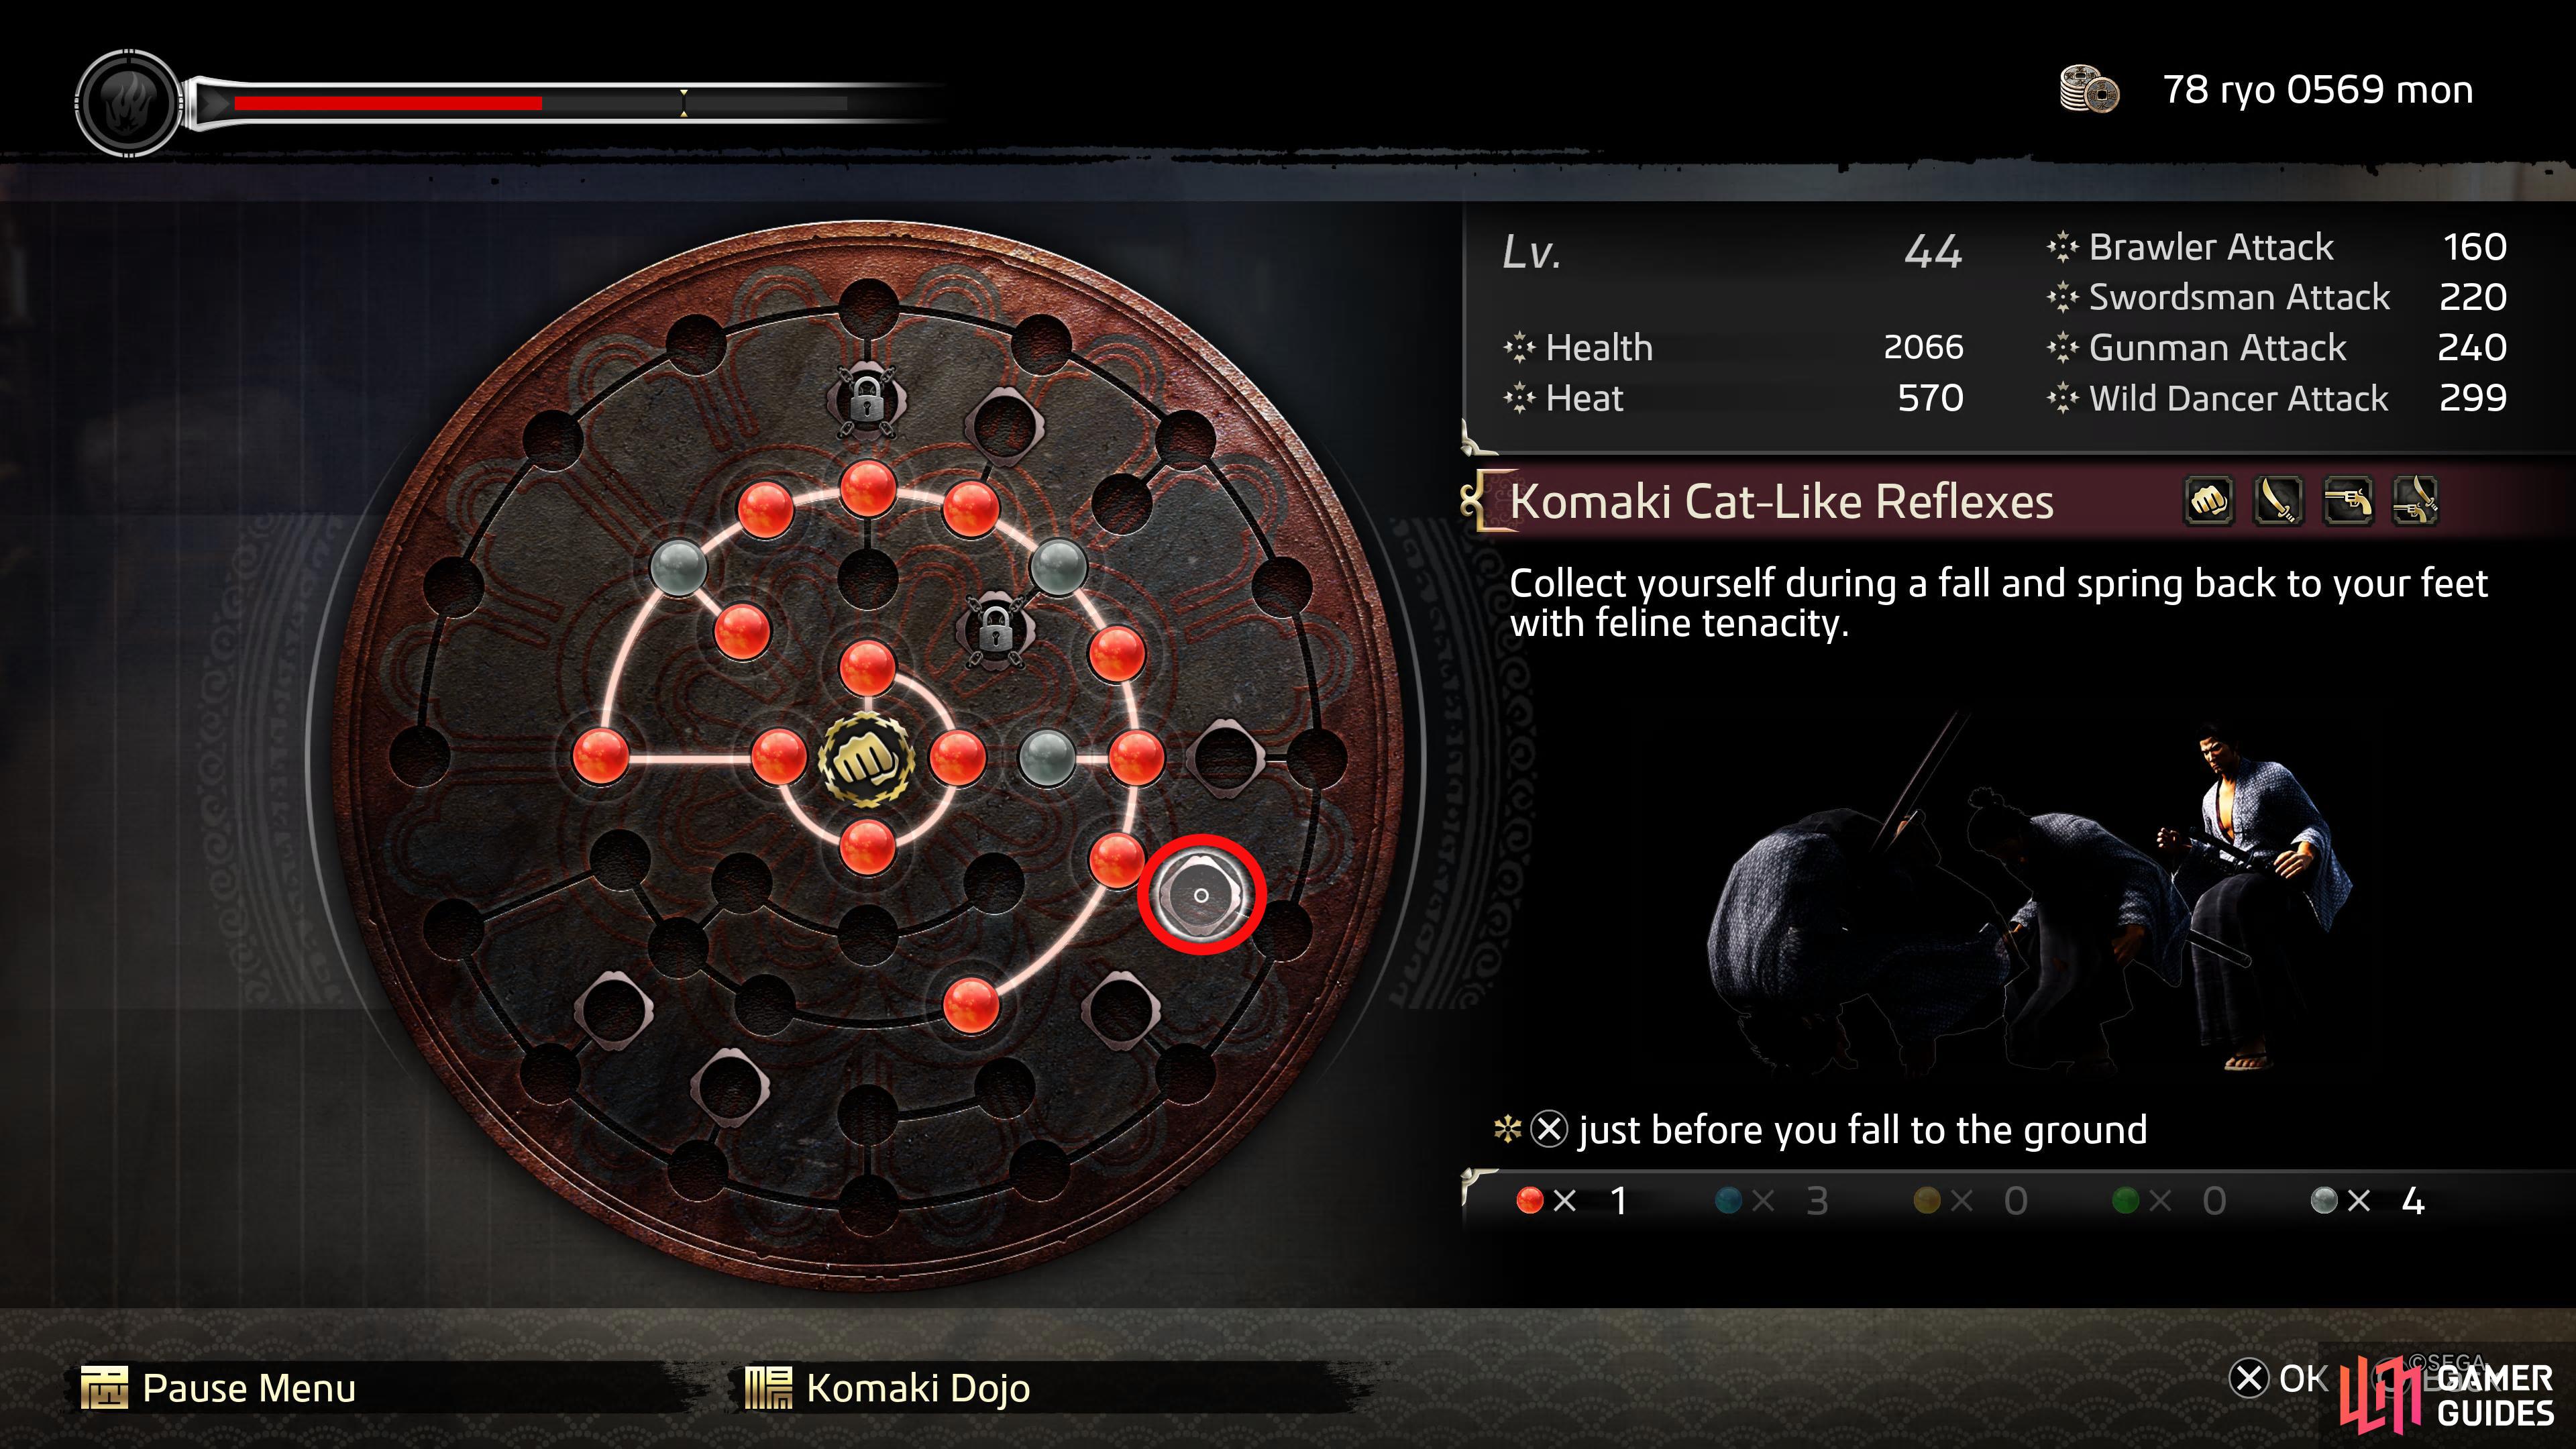 Once the training is complete the seal will unlock on the Ability Wheel.